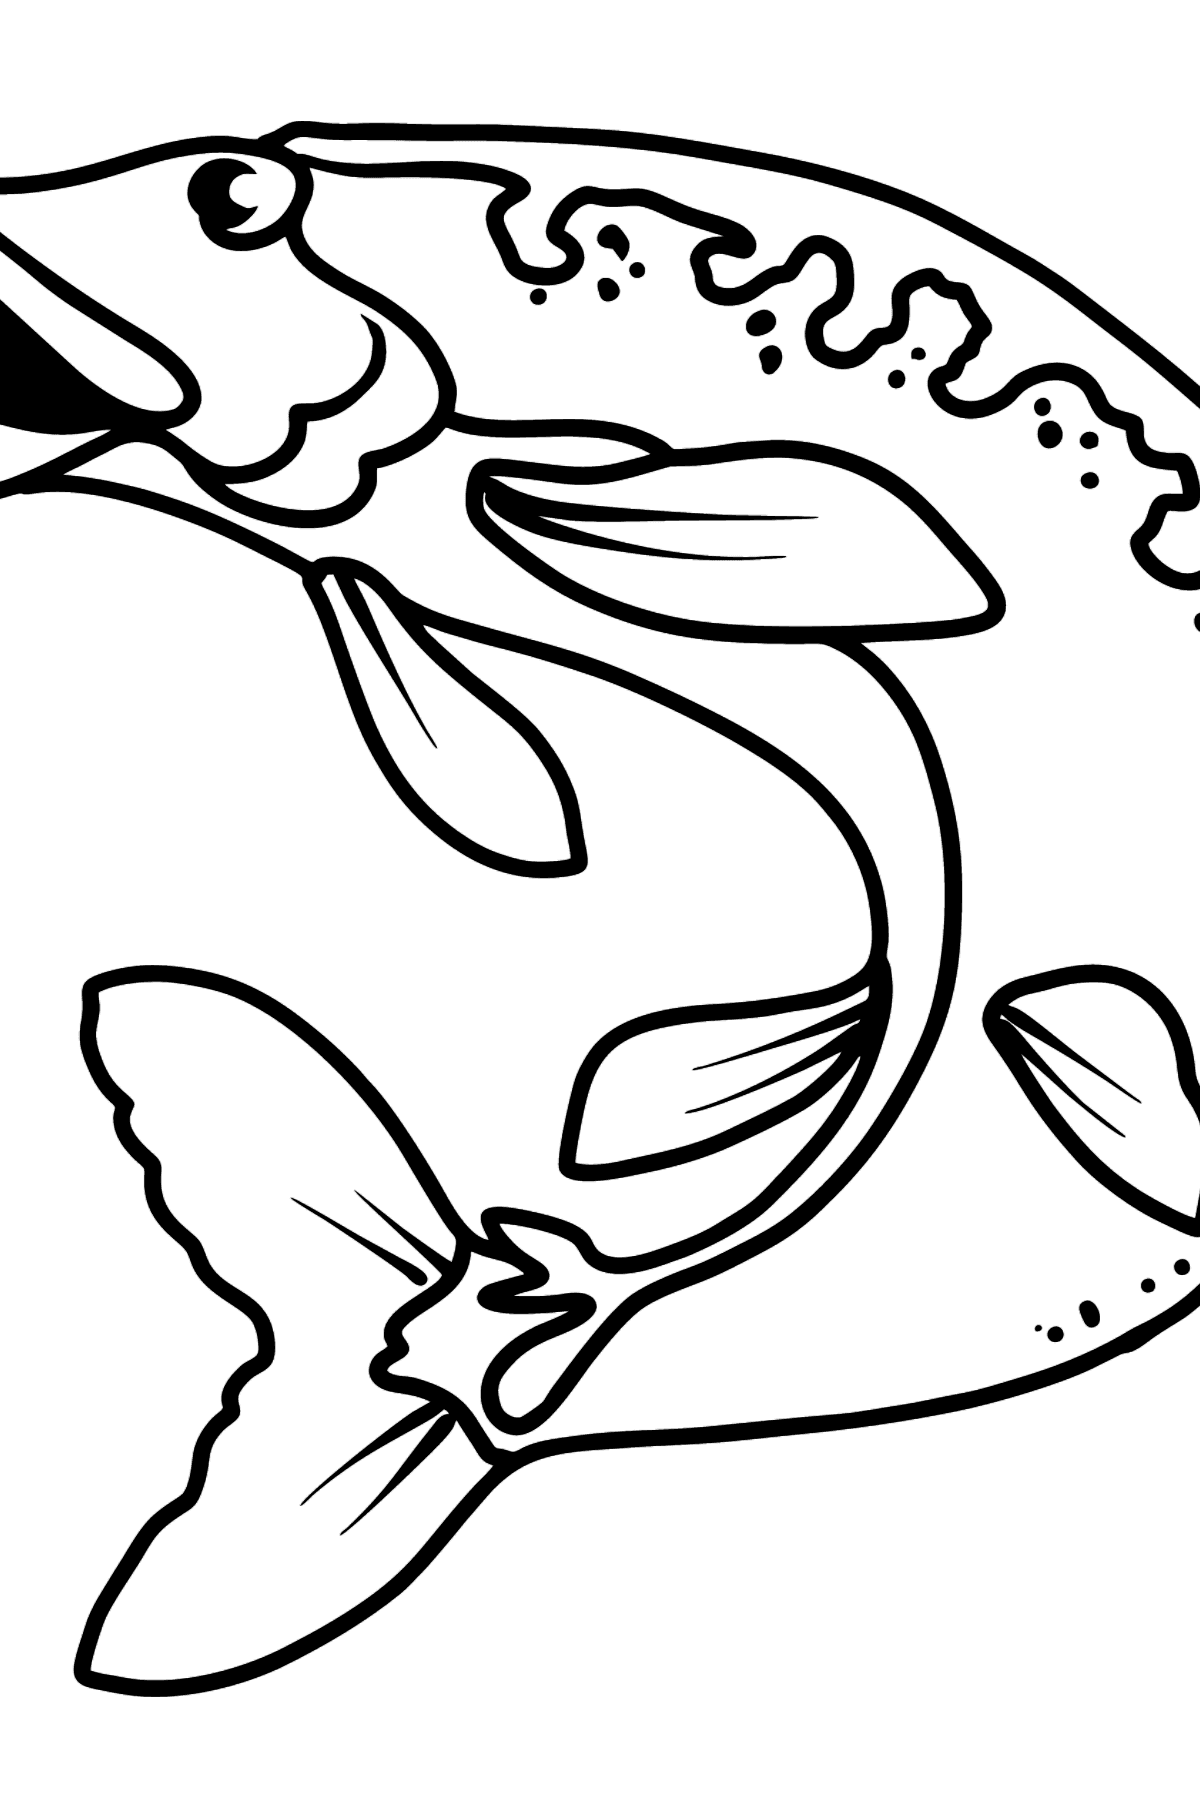 Pike coloring page - Coloring Pages for Kids